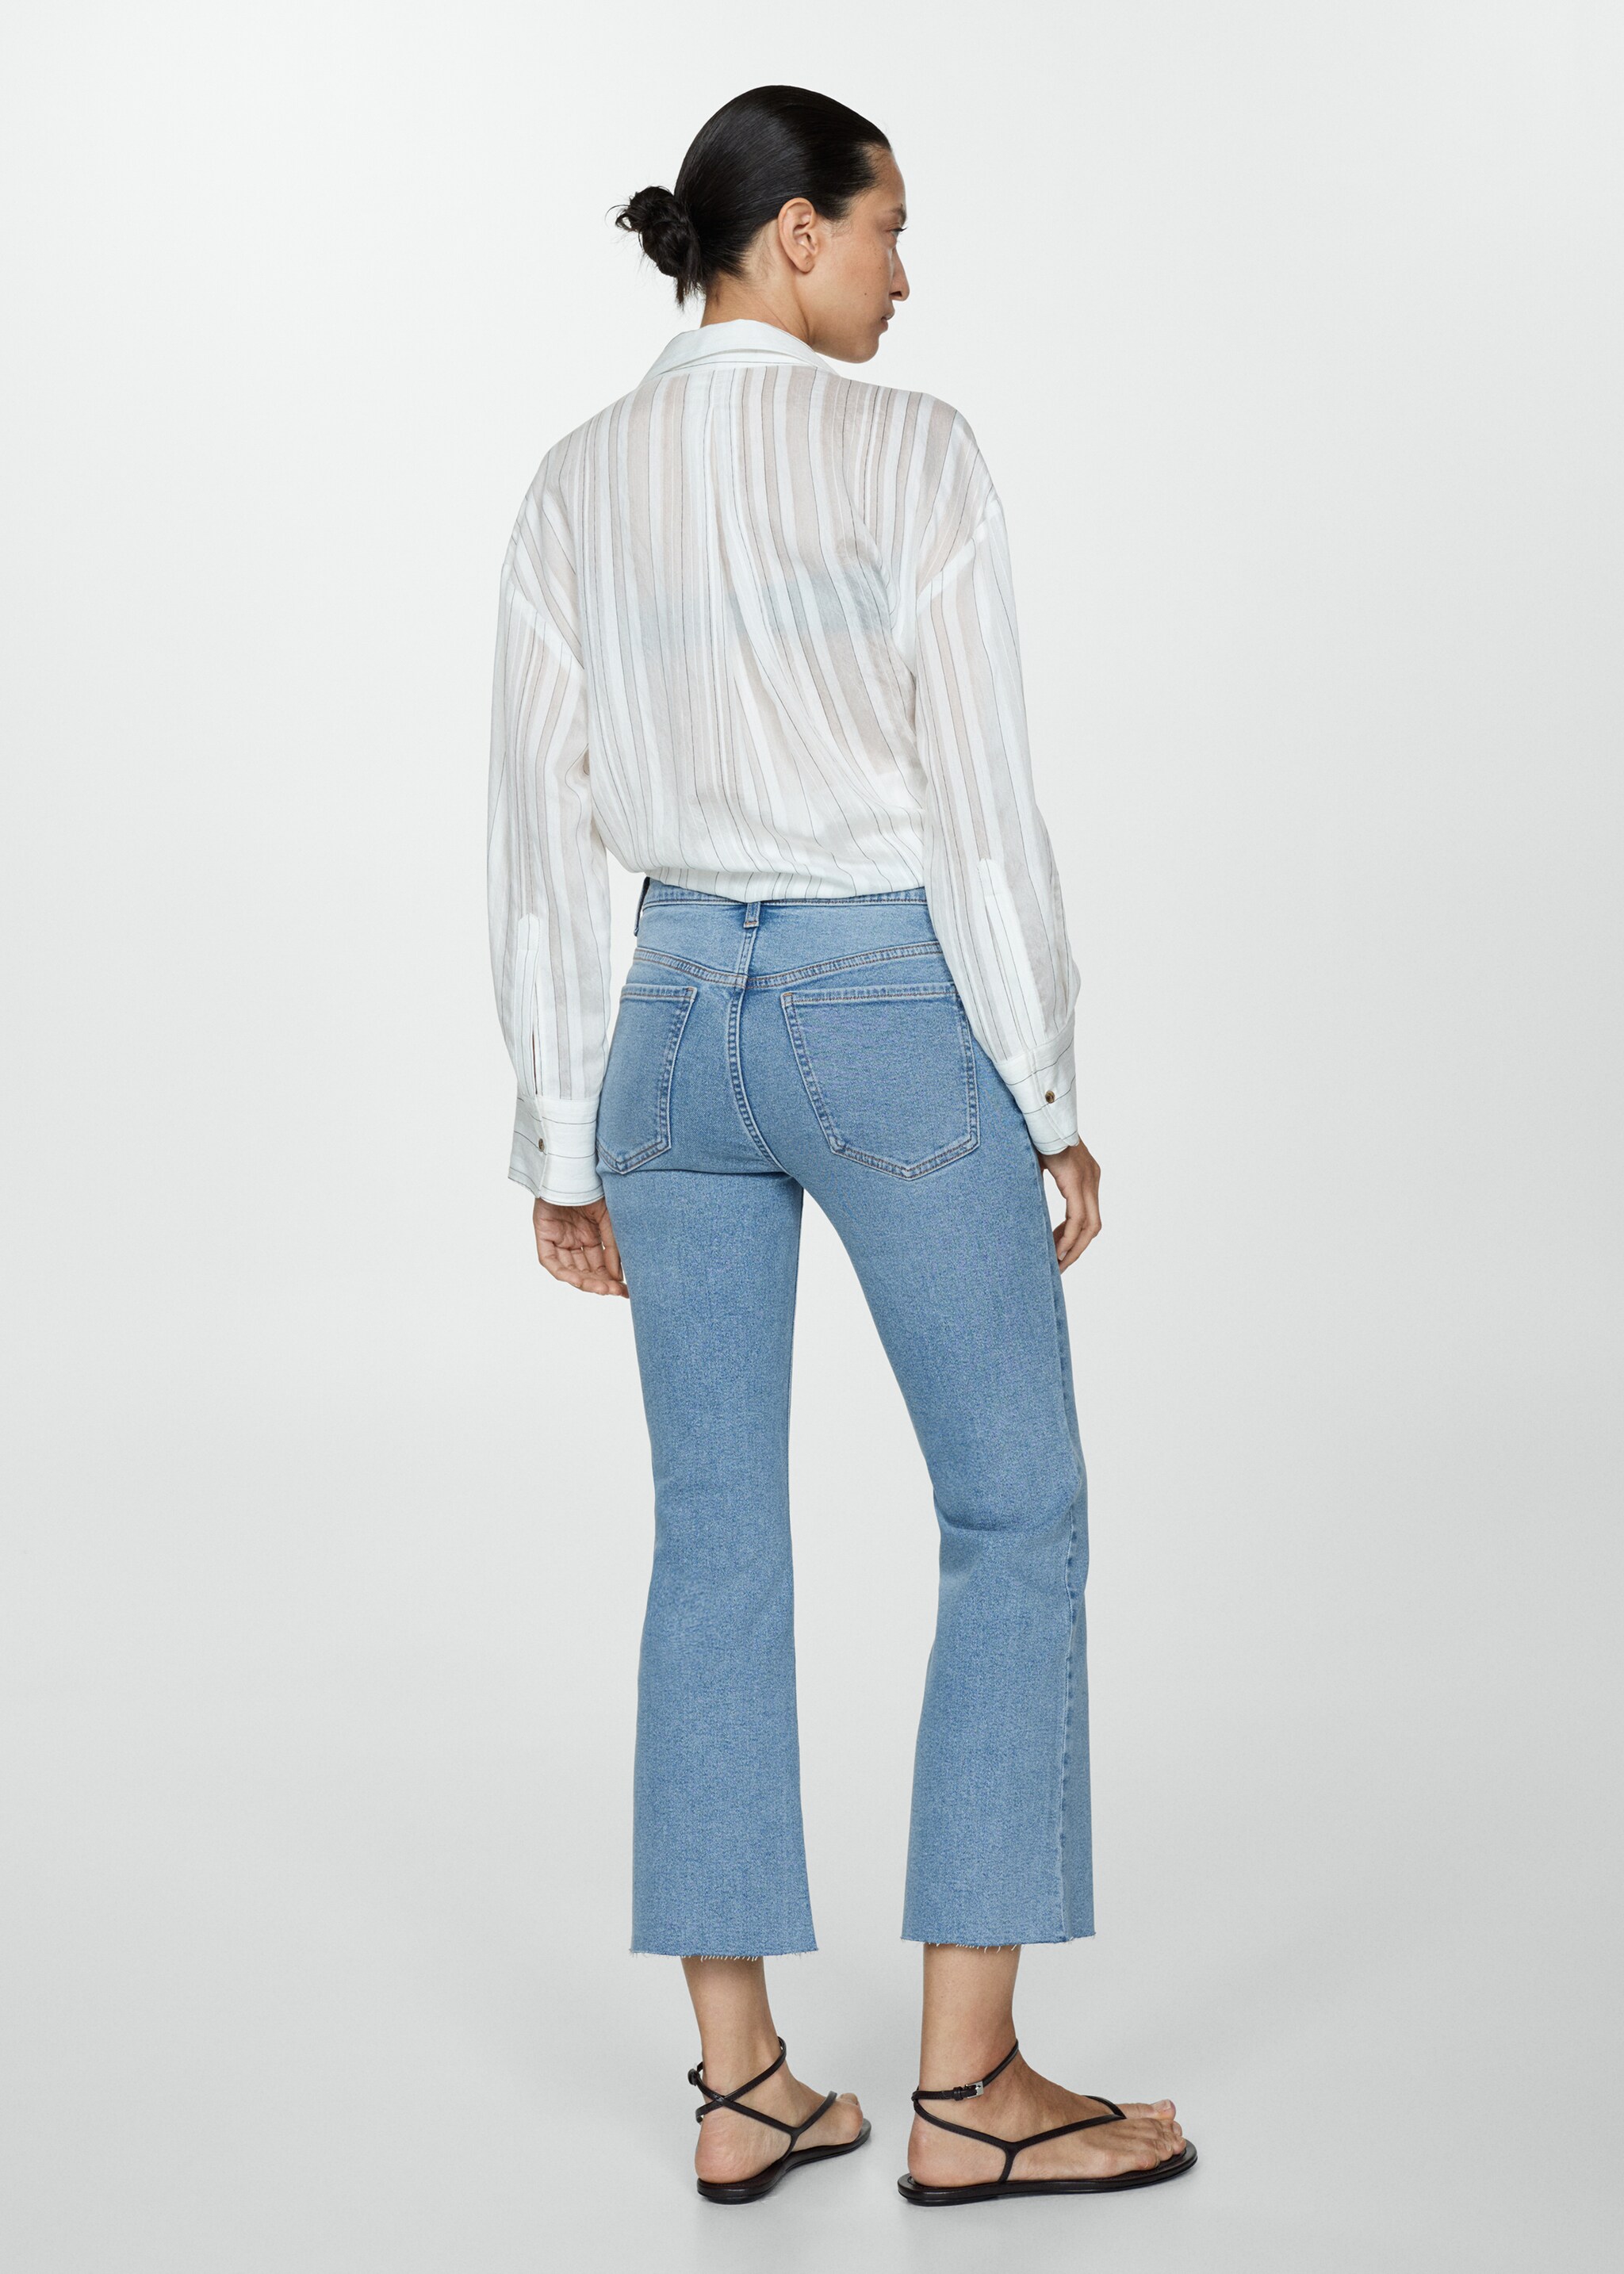 Sienna flared cropped jeans - Reverse of the article